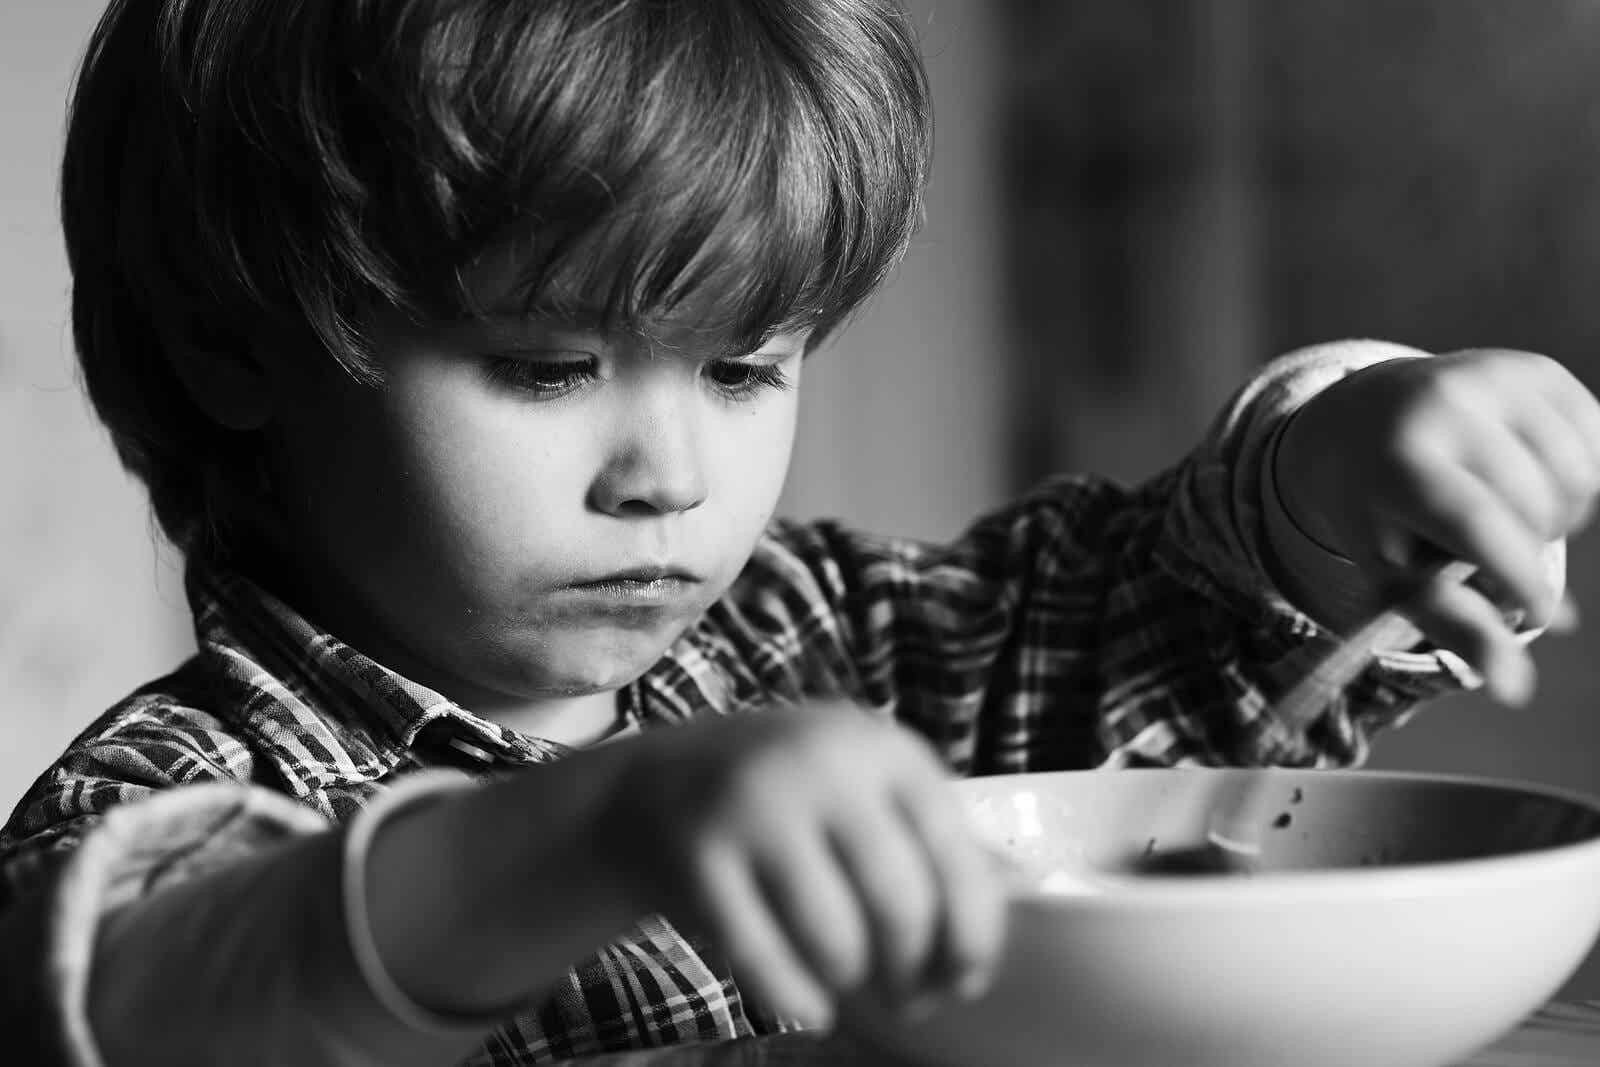 A black and white photo of a child eating a bowl of food with a serious face.